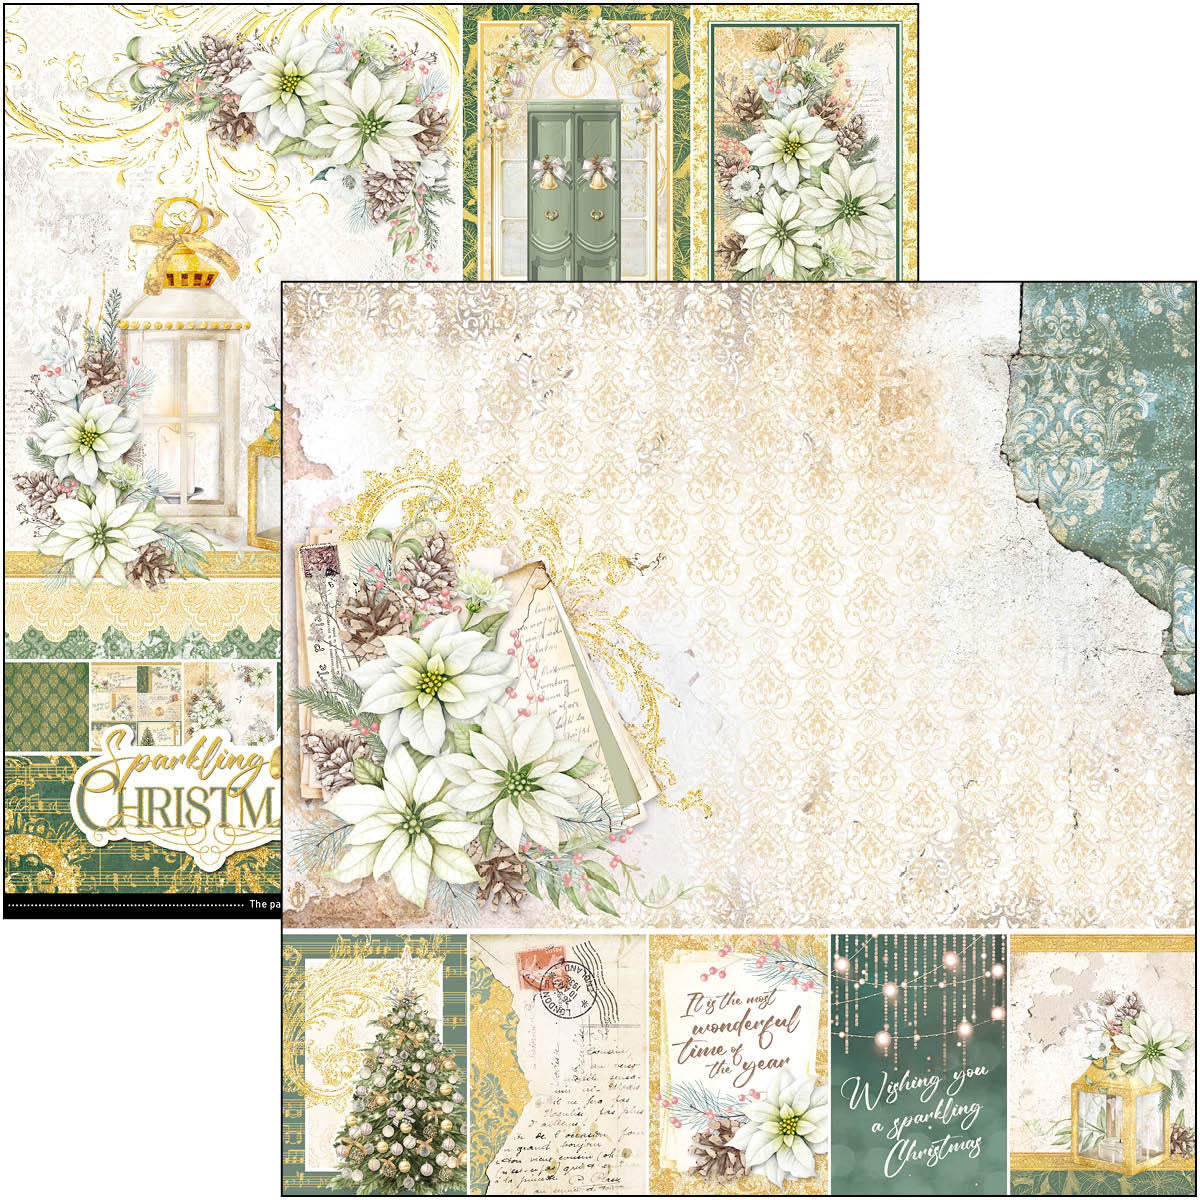 Wreaths & Toys - Ciao Bella 12x12 Cardstock